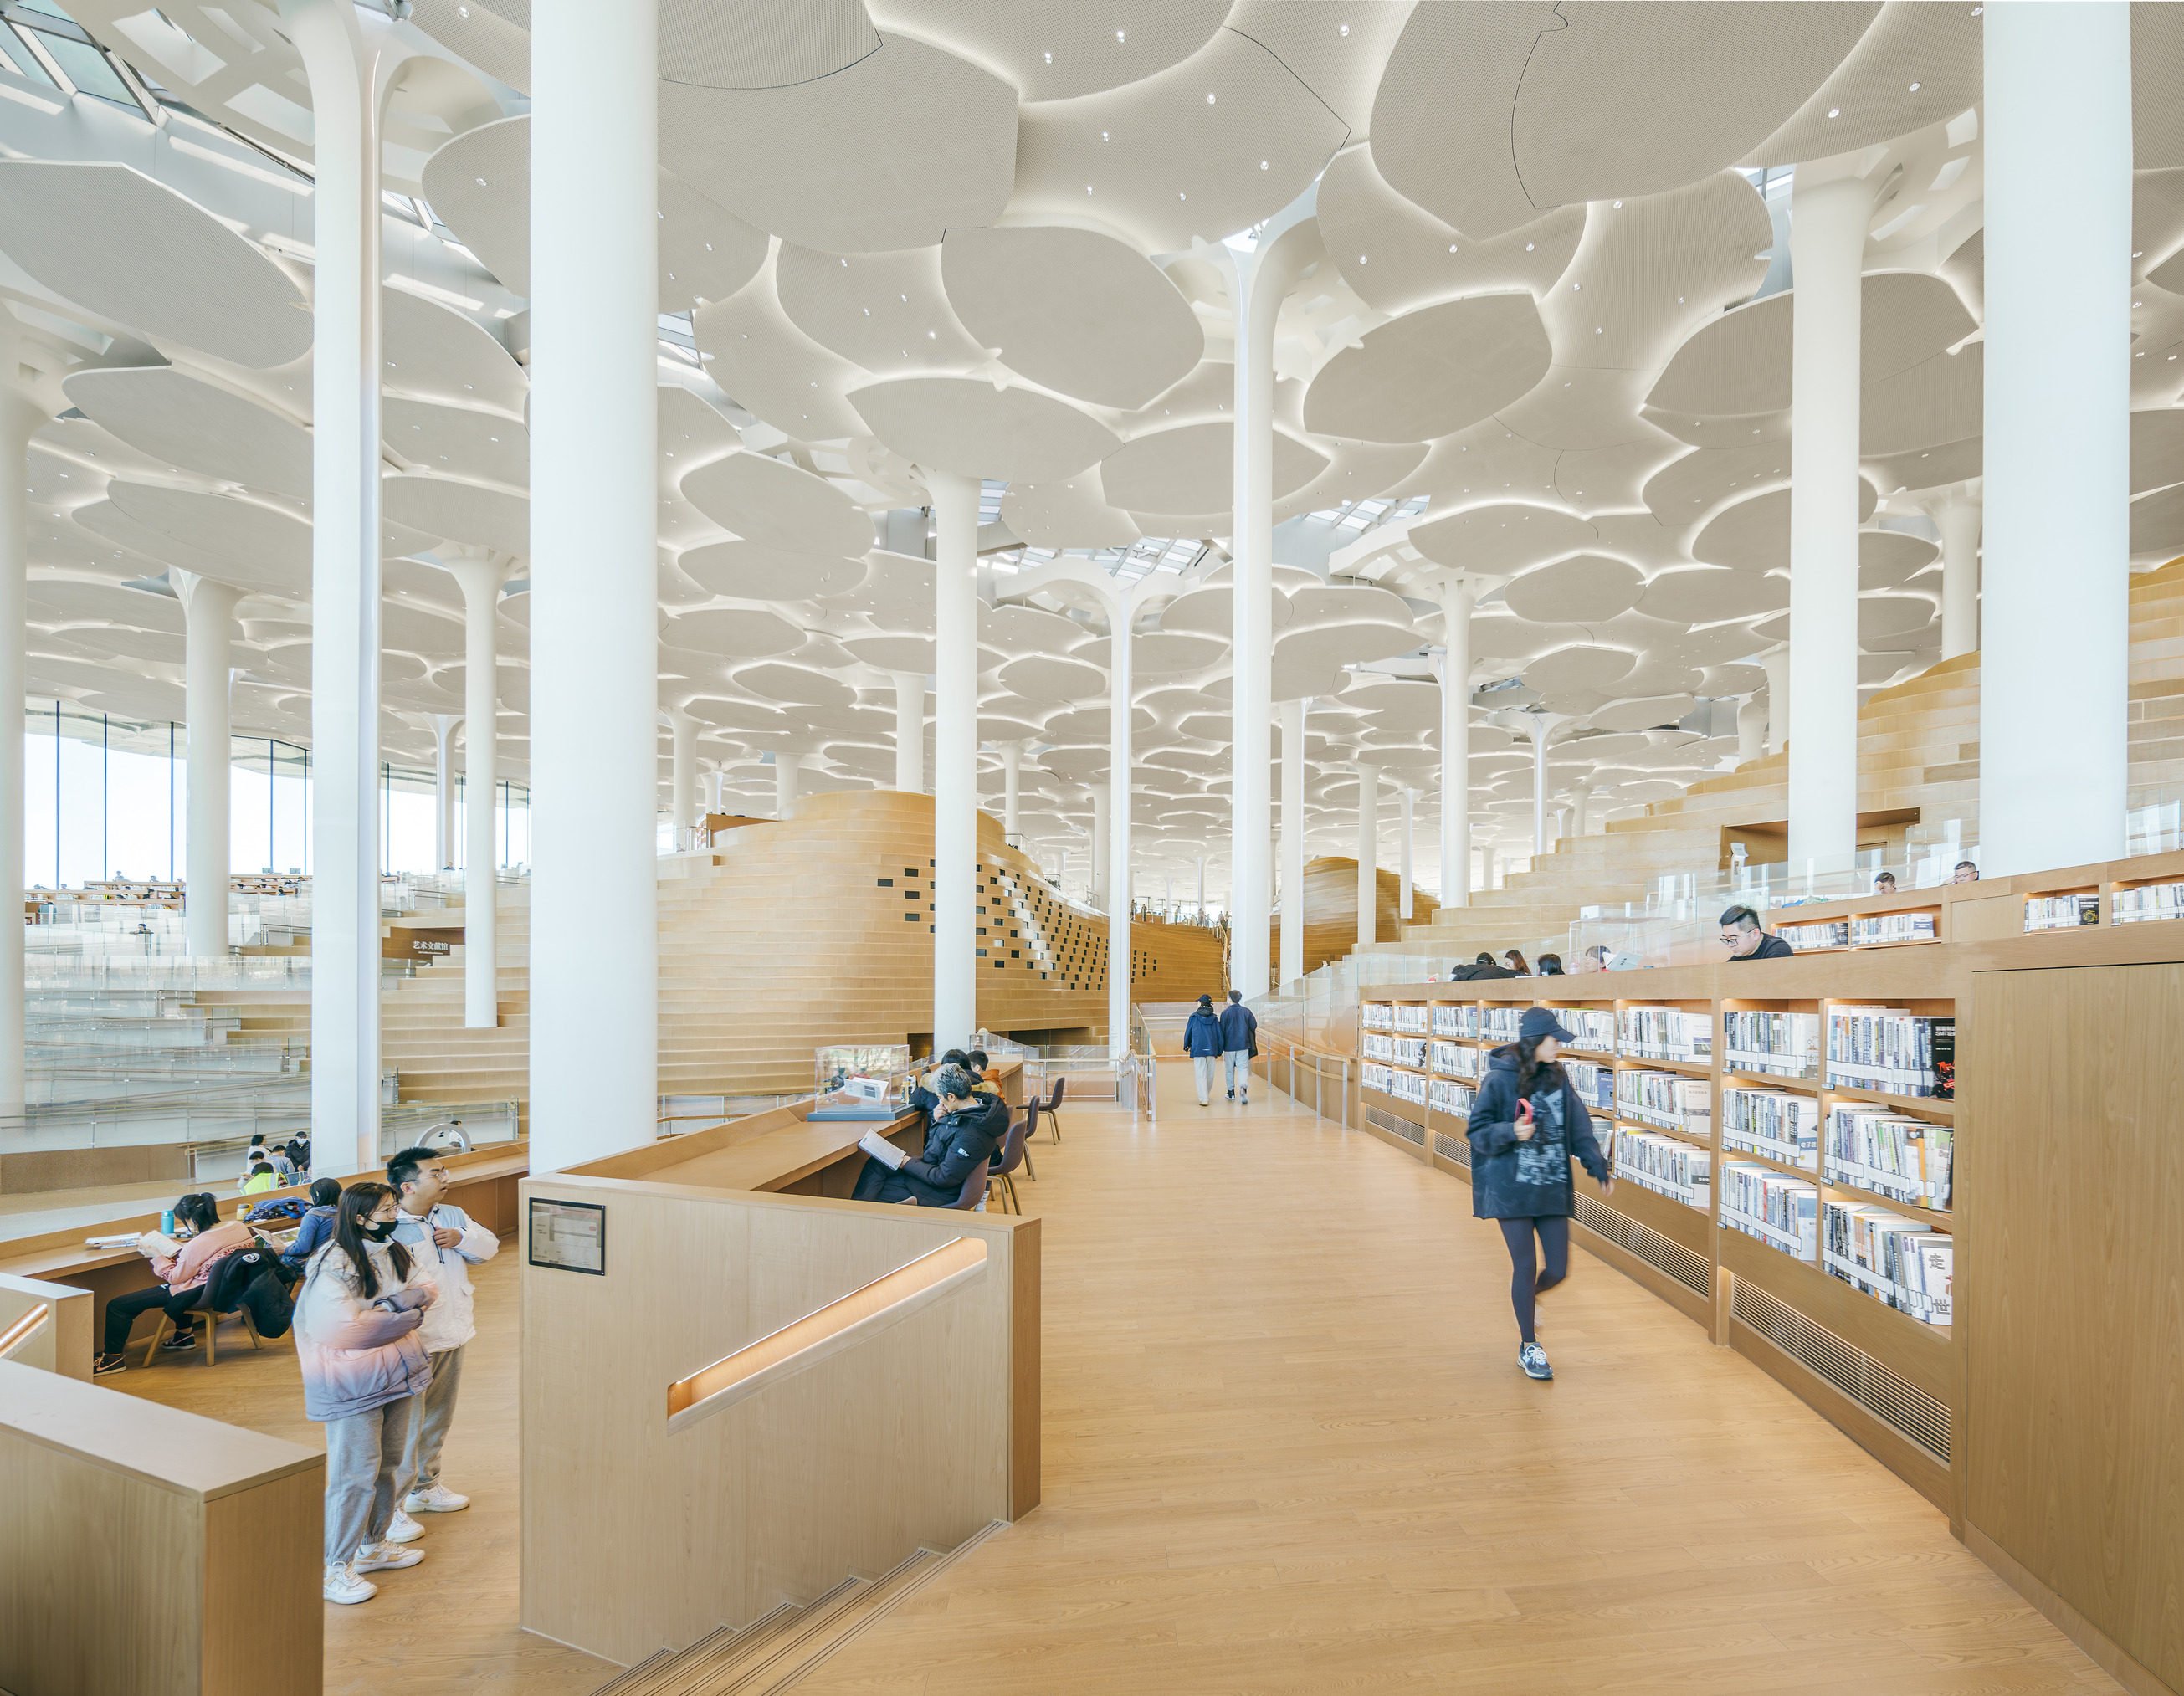 The world’s largest library reading space, in the Beijing City Library in China’s capital, was inspired by nature and designed to be something of a social space. Photo: Yumeng Zhu